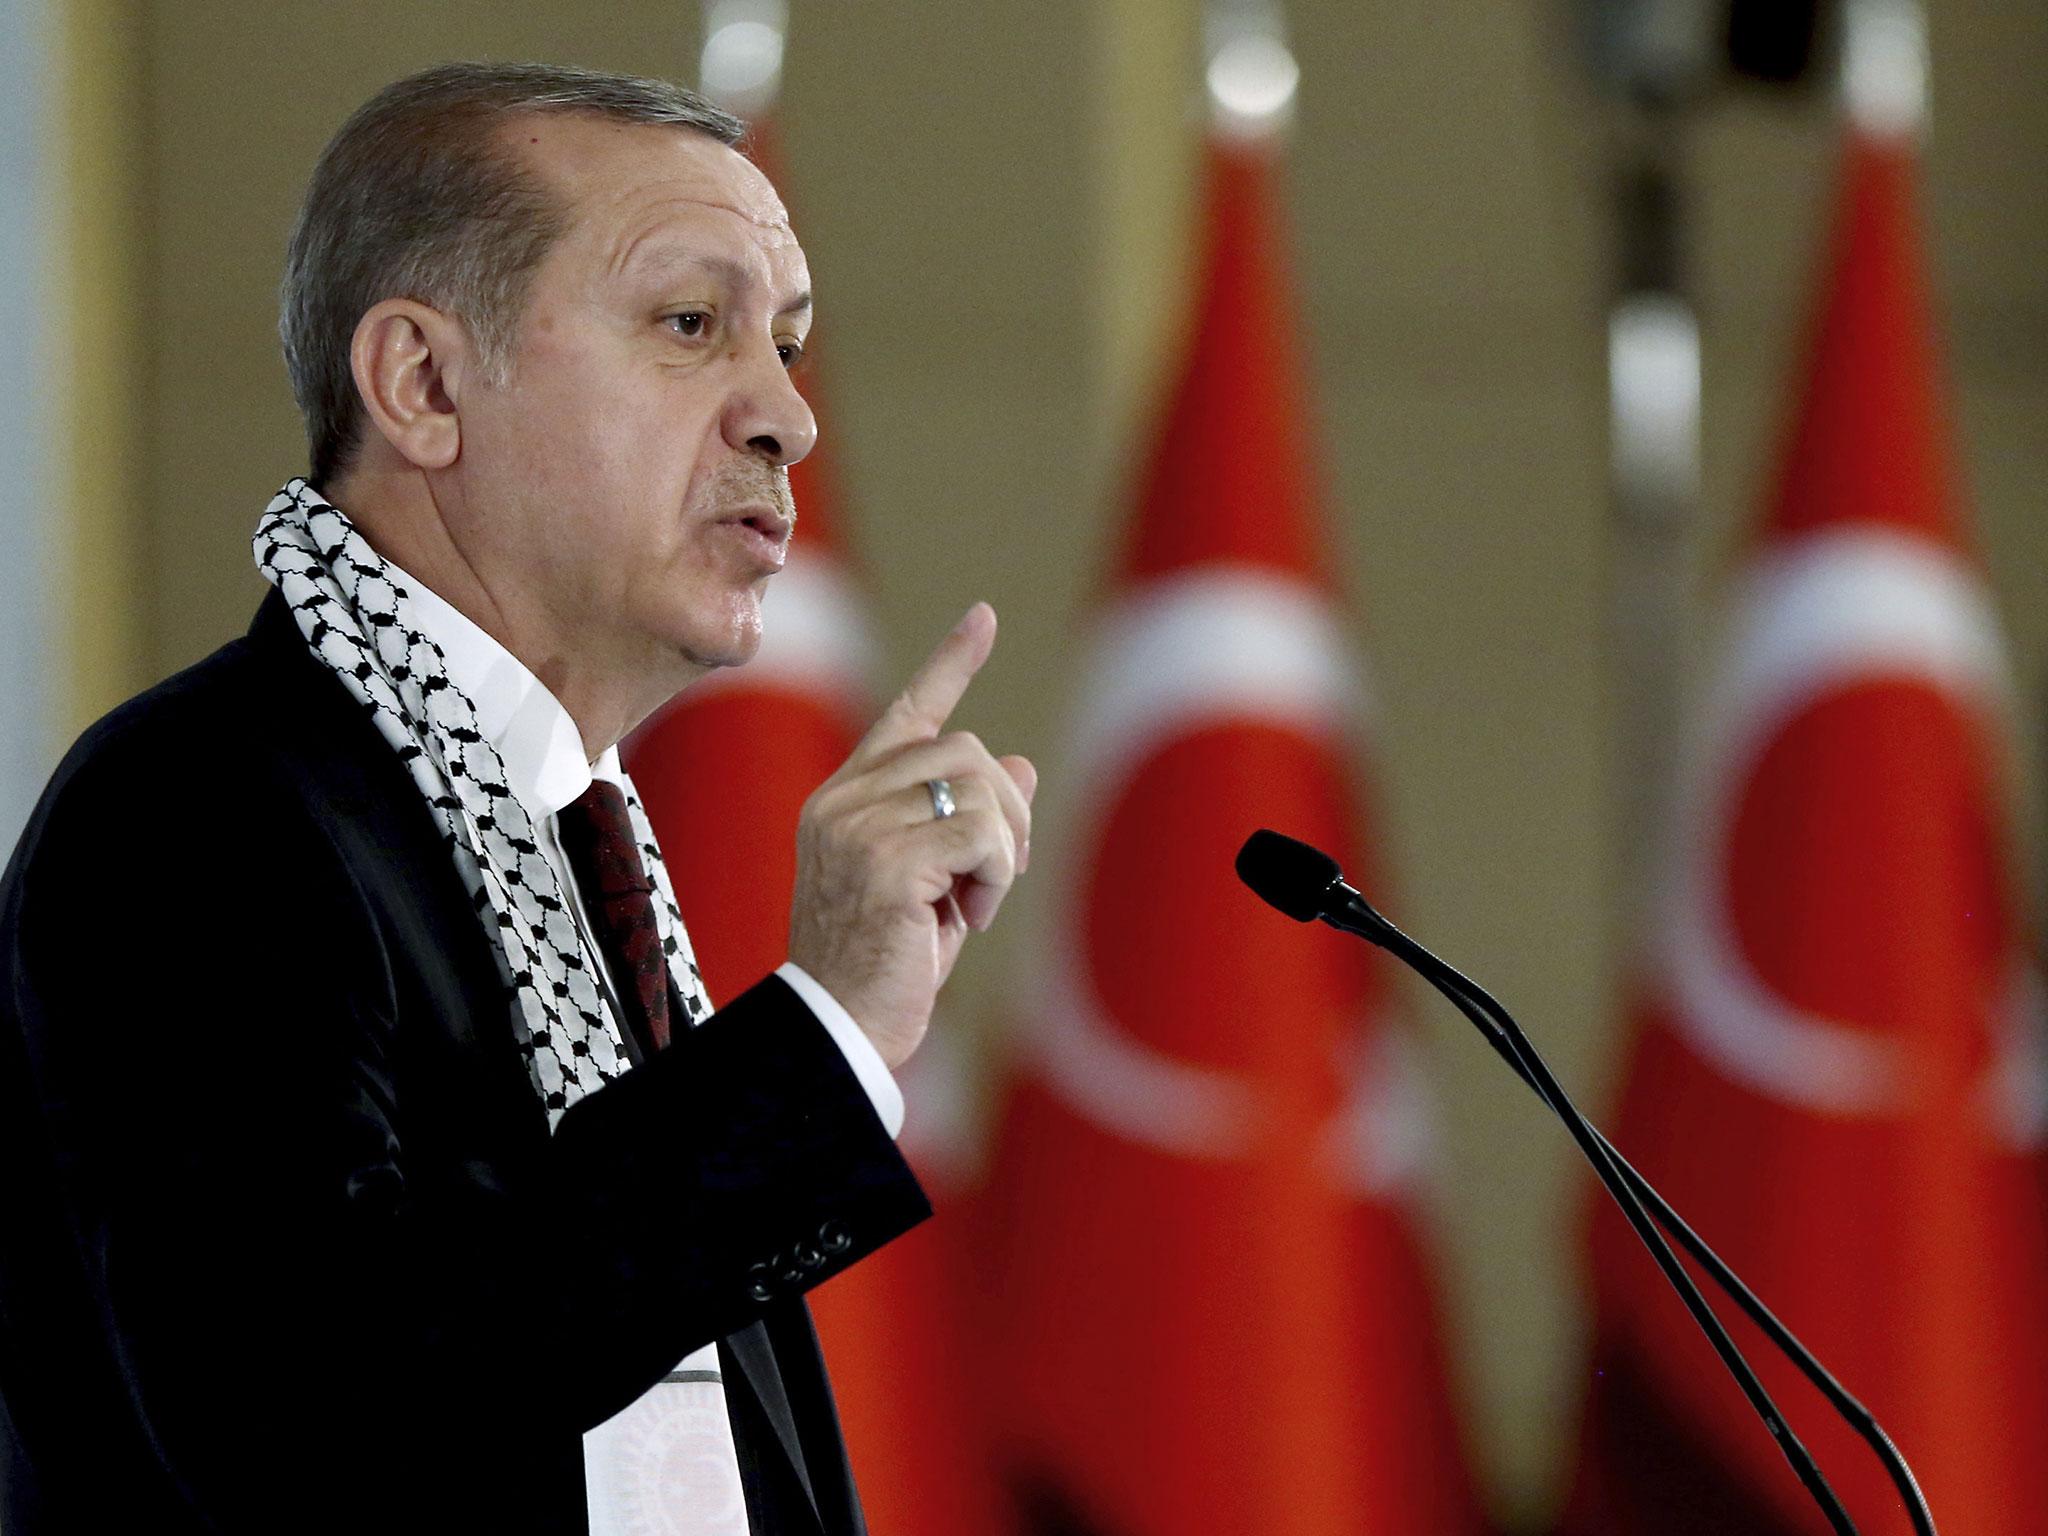 Turkey's President Erdogan maintains the country's forces were in Syria 'to bring justice'